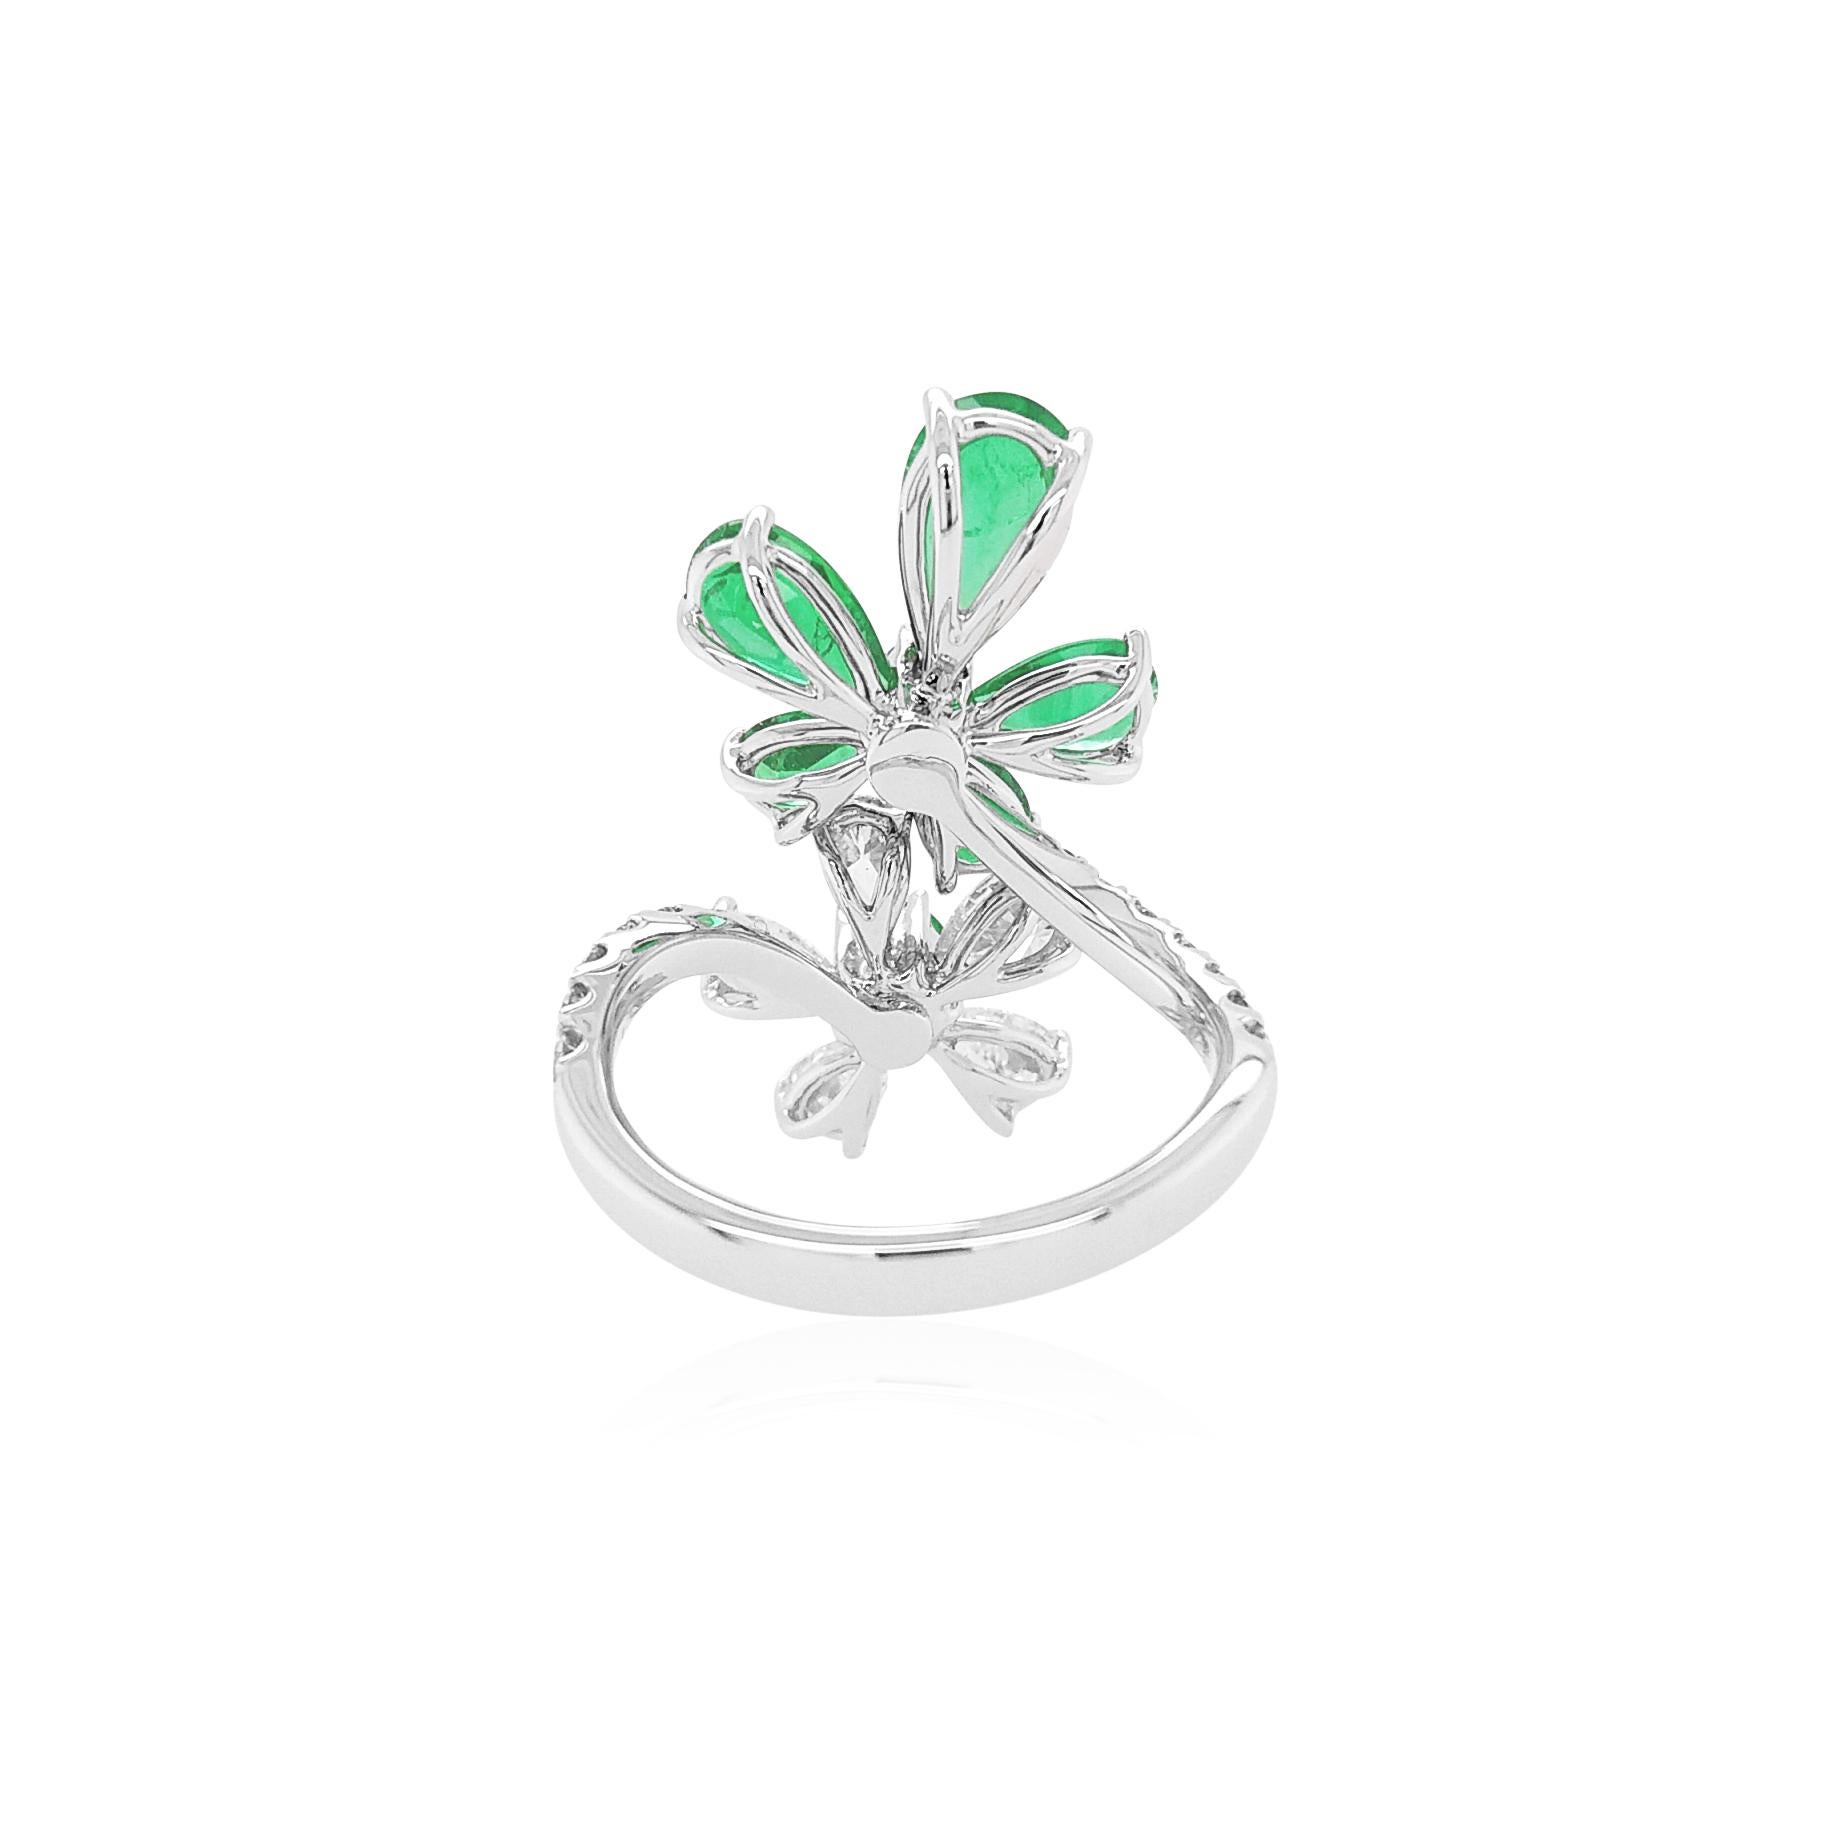 This intricate 18K White Gold cocktail ring features high-quality Colombian Emeralds set amongst scintillating white diamond floral motif. Unique and striking, this exceptional ring will add a touch of high glamour to any look. A fantastic addition